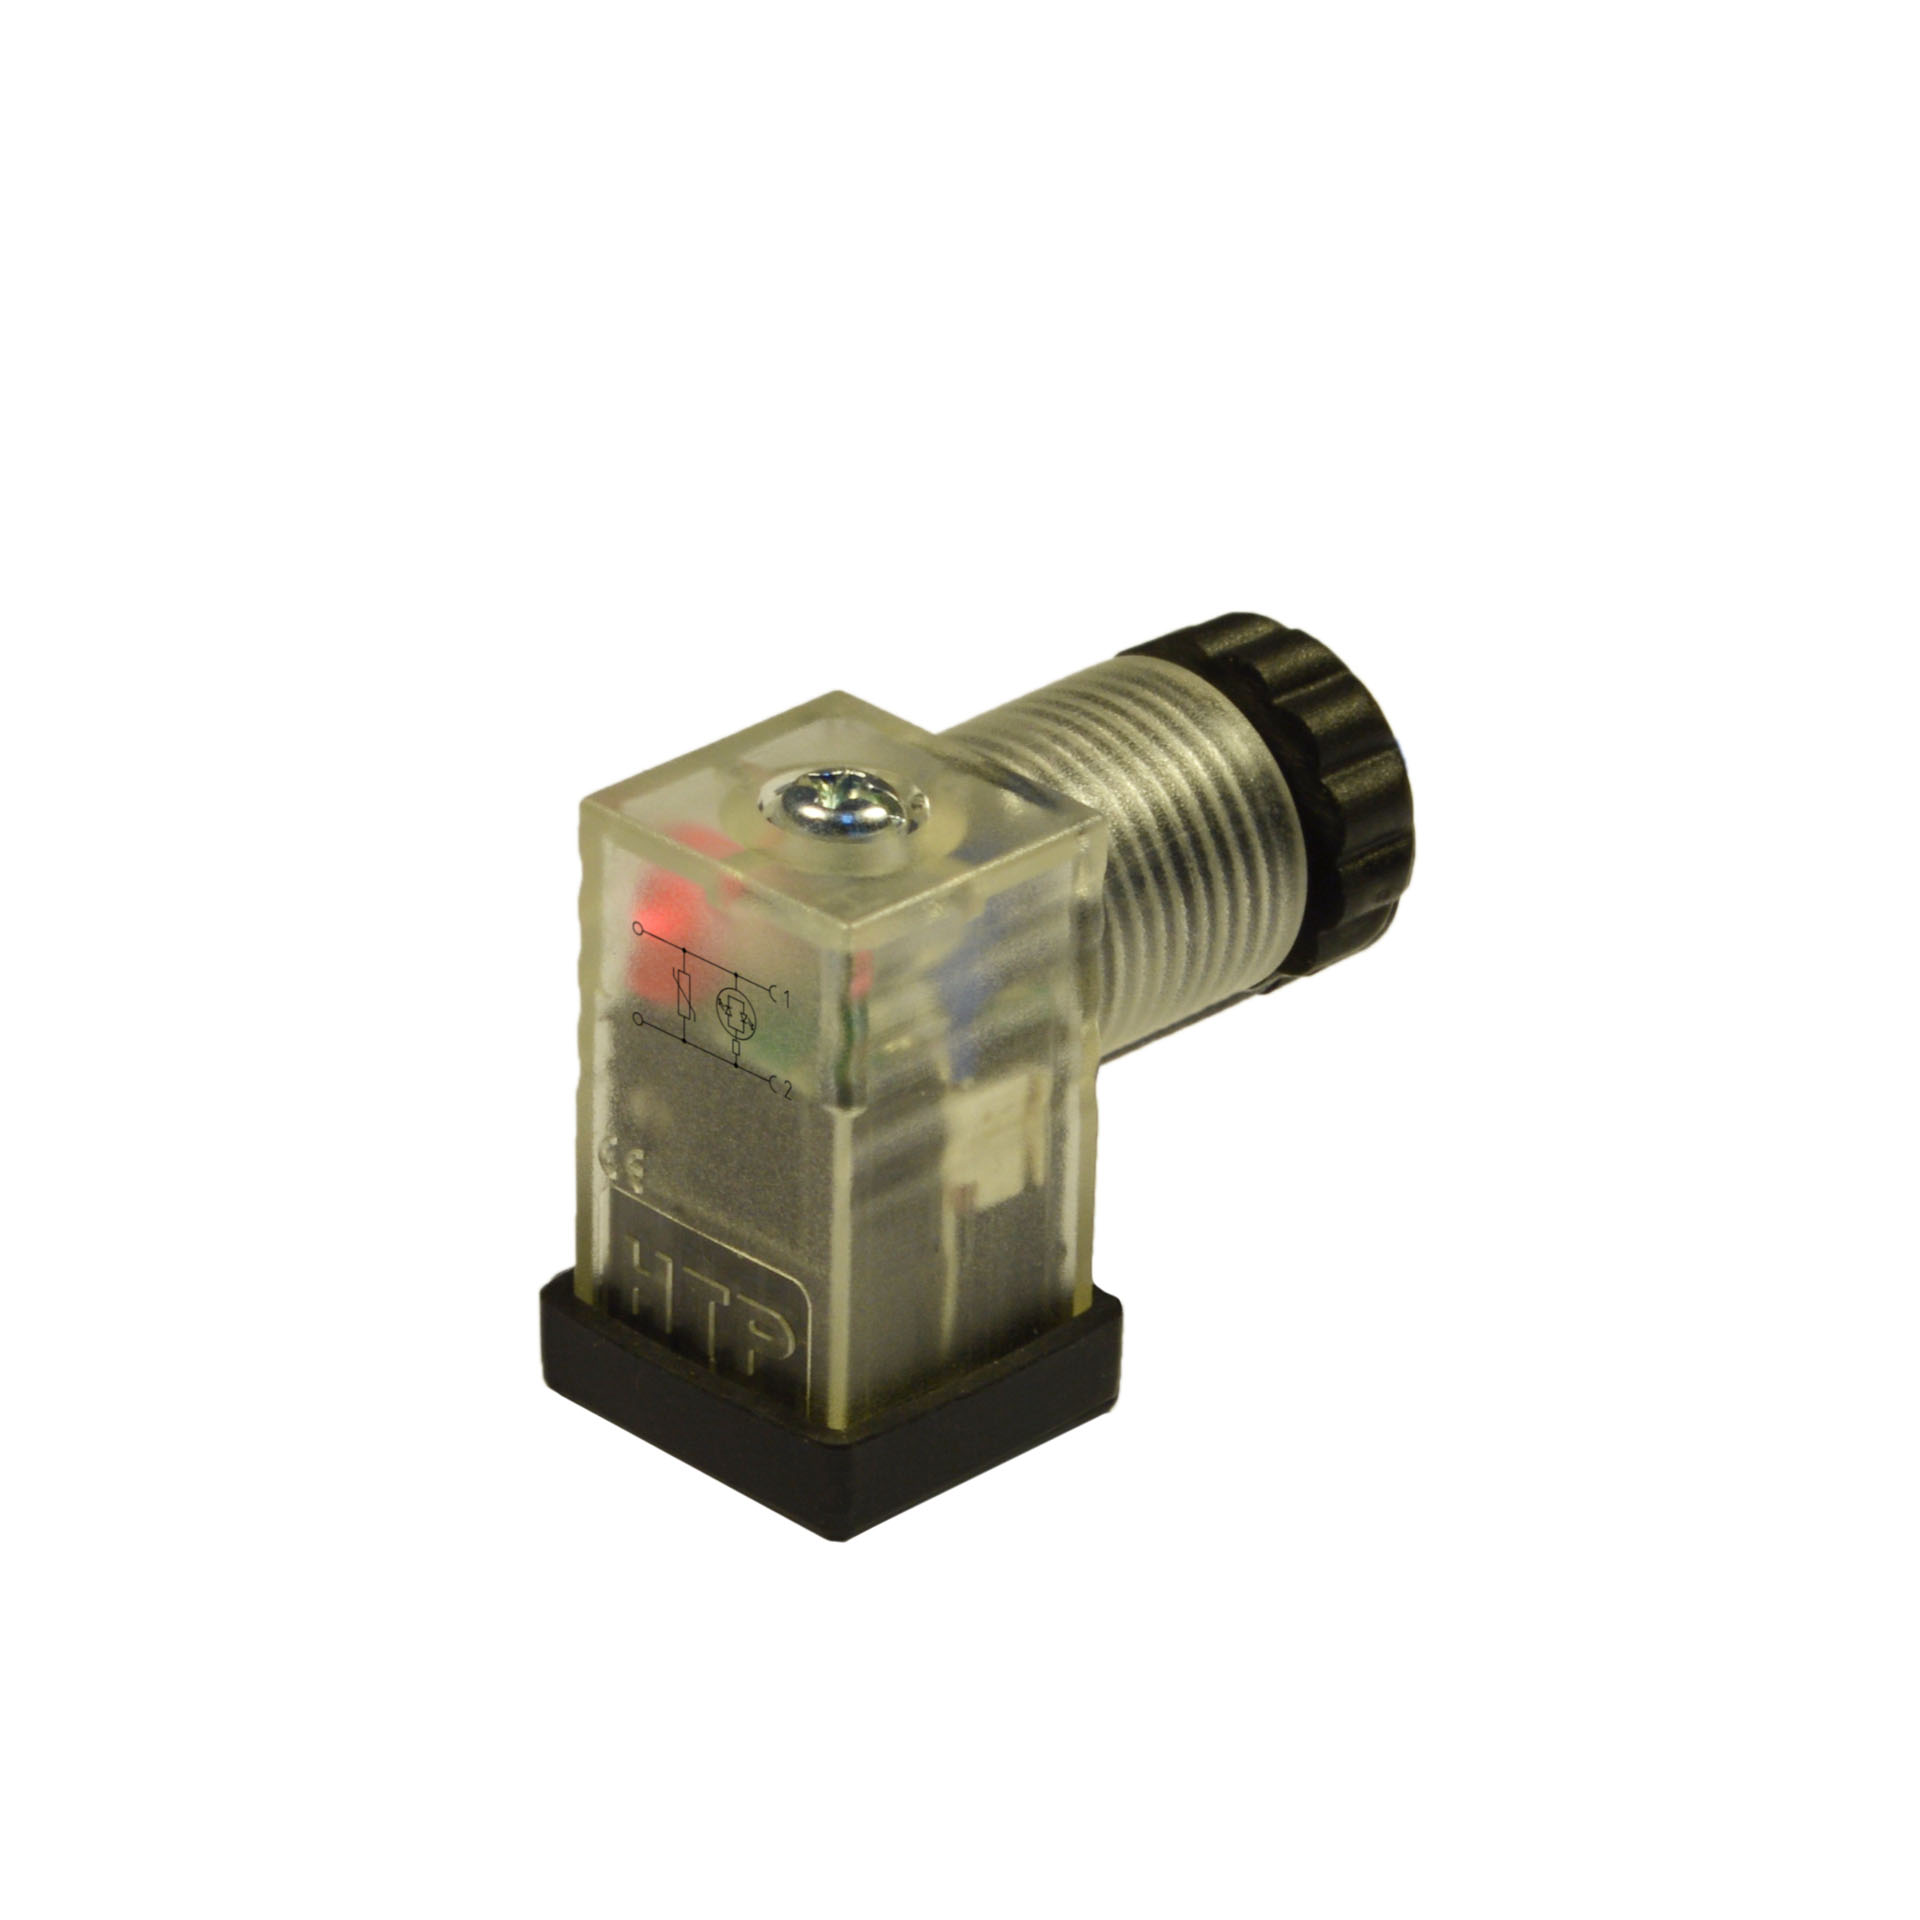 Industriale/C a cablare,2p+T(h.6),LED rosso+vdr,230VAC/DC,PG7